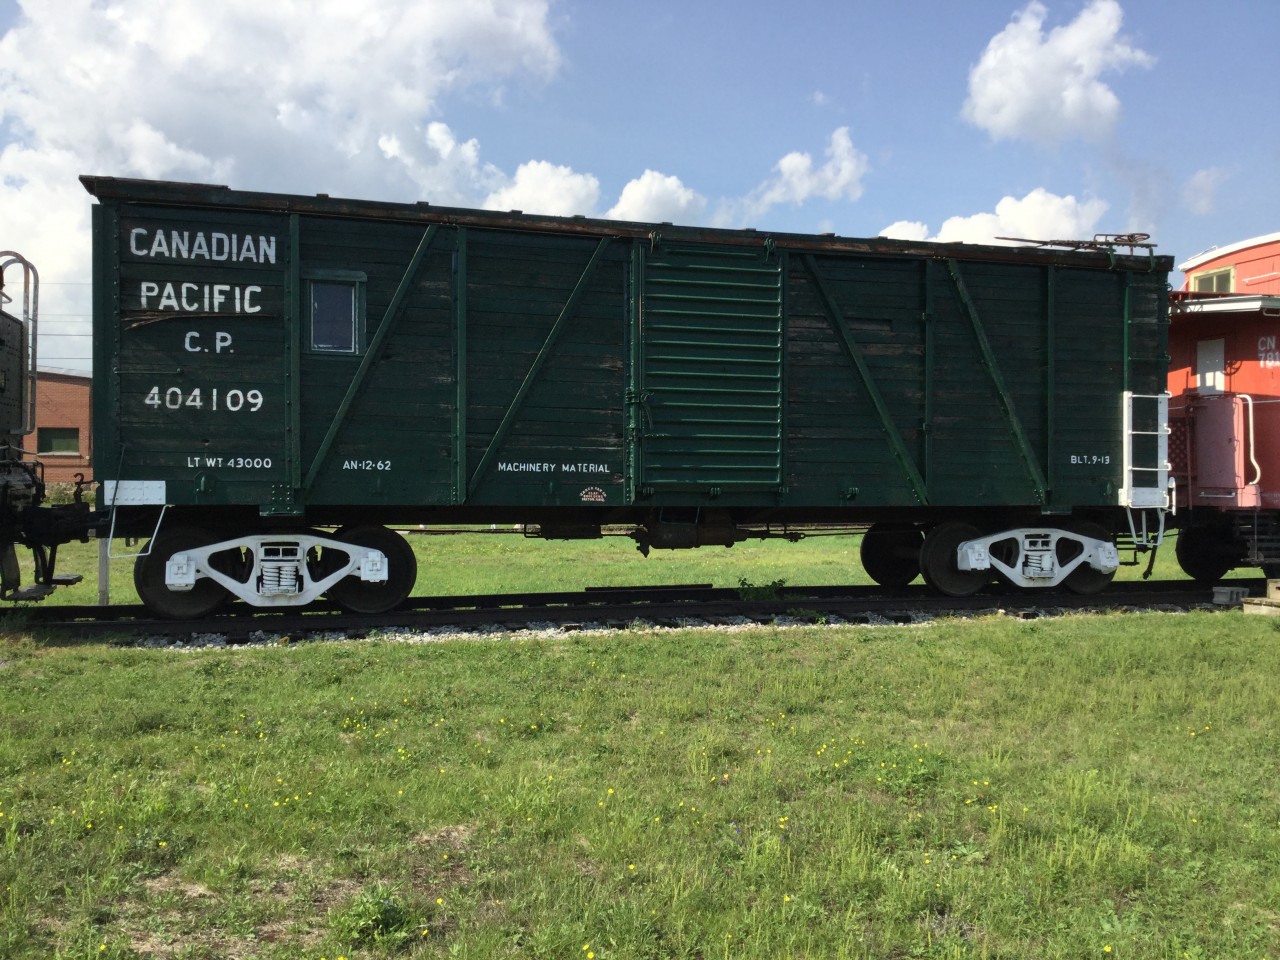 Former Canadian Pacific wooden boxcar 404109 on display at the Memory Junction Railway Museum in Brighton, ON.